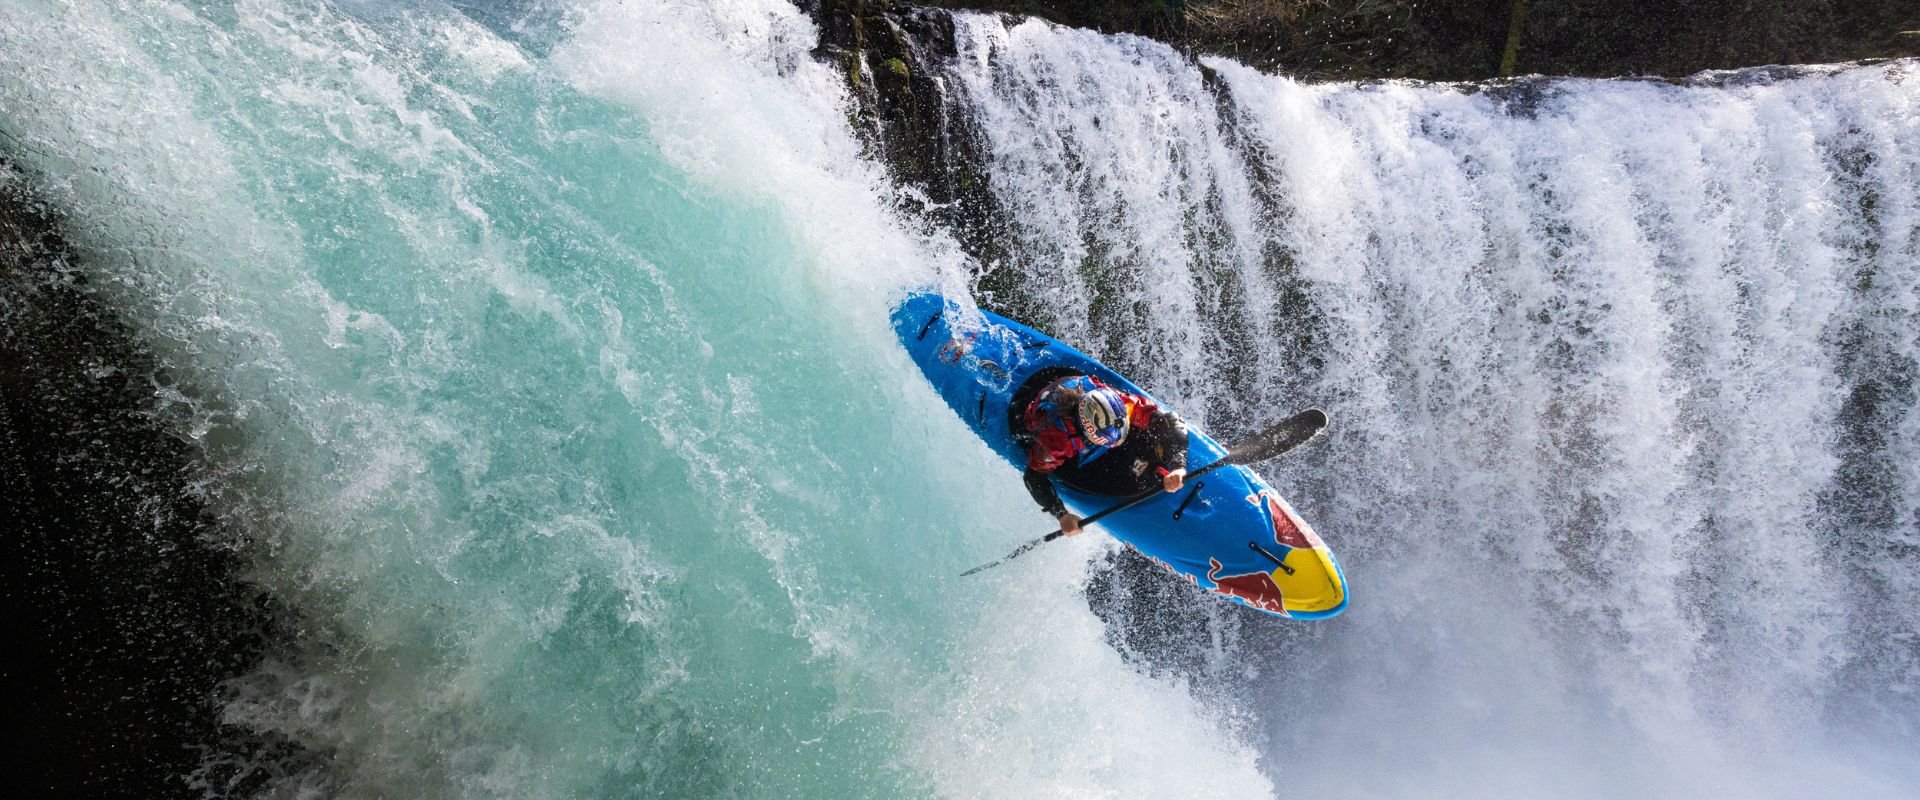 VIDEO: Hooked on Wild Waters S4:E2 WATCH NOW! - Jackson Kayak